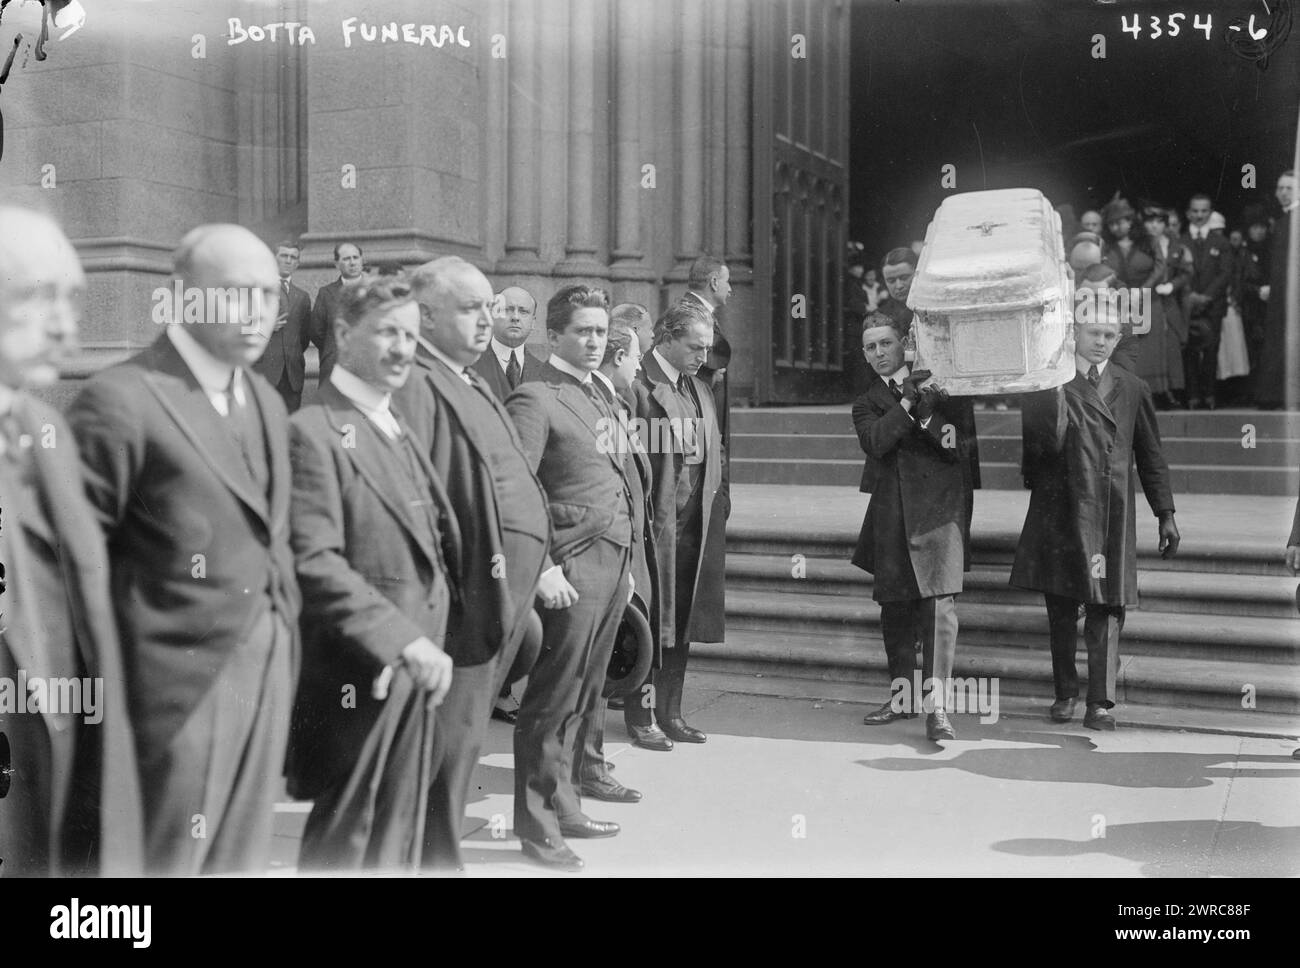 Botta funeral, Photograph shows the funeral of Italian opera singer Luca Botta (1882-1917), which took place on Oct. 3, 1917 in New York City. Pallbearers bringing coffin out of St. Patrick's Cathedral were Pasquale Amato, Giuseppe de Luca, Leon Rothier, Antonio Scotti, Francesca Romei, Giulio Setti, Gennaro Papi, Fernando Carpi, Giulio Crimi, F.C. Coppicus, G. Viafora and Dr. H.H. Curtis., 1917 Oct. 3, Glass negatives, 1 negative: glass Stock Photo